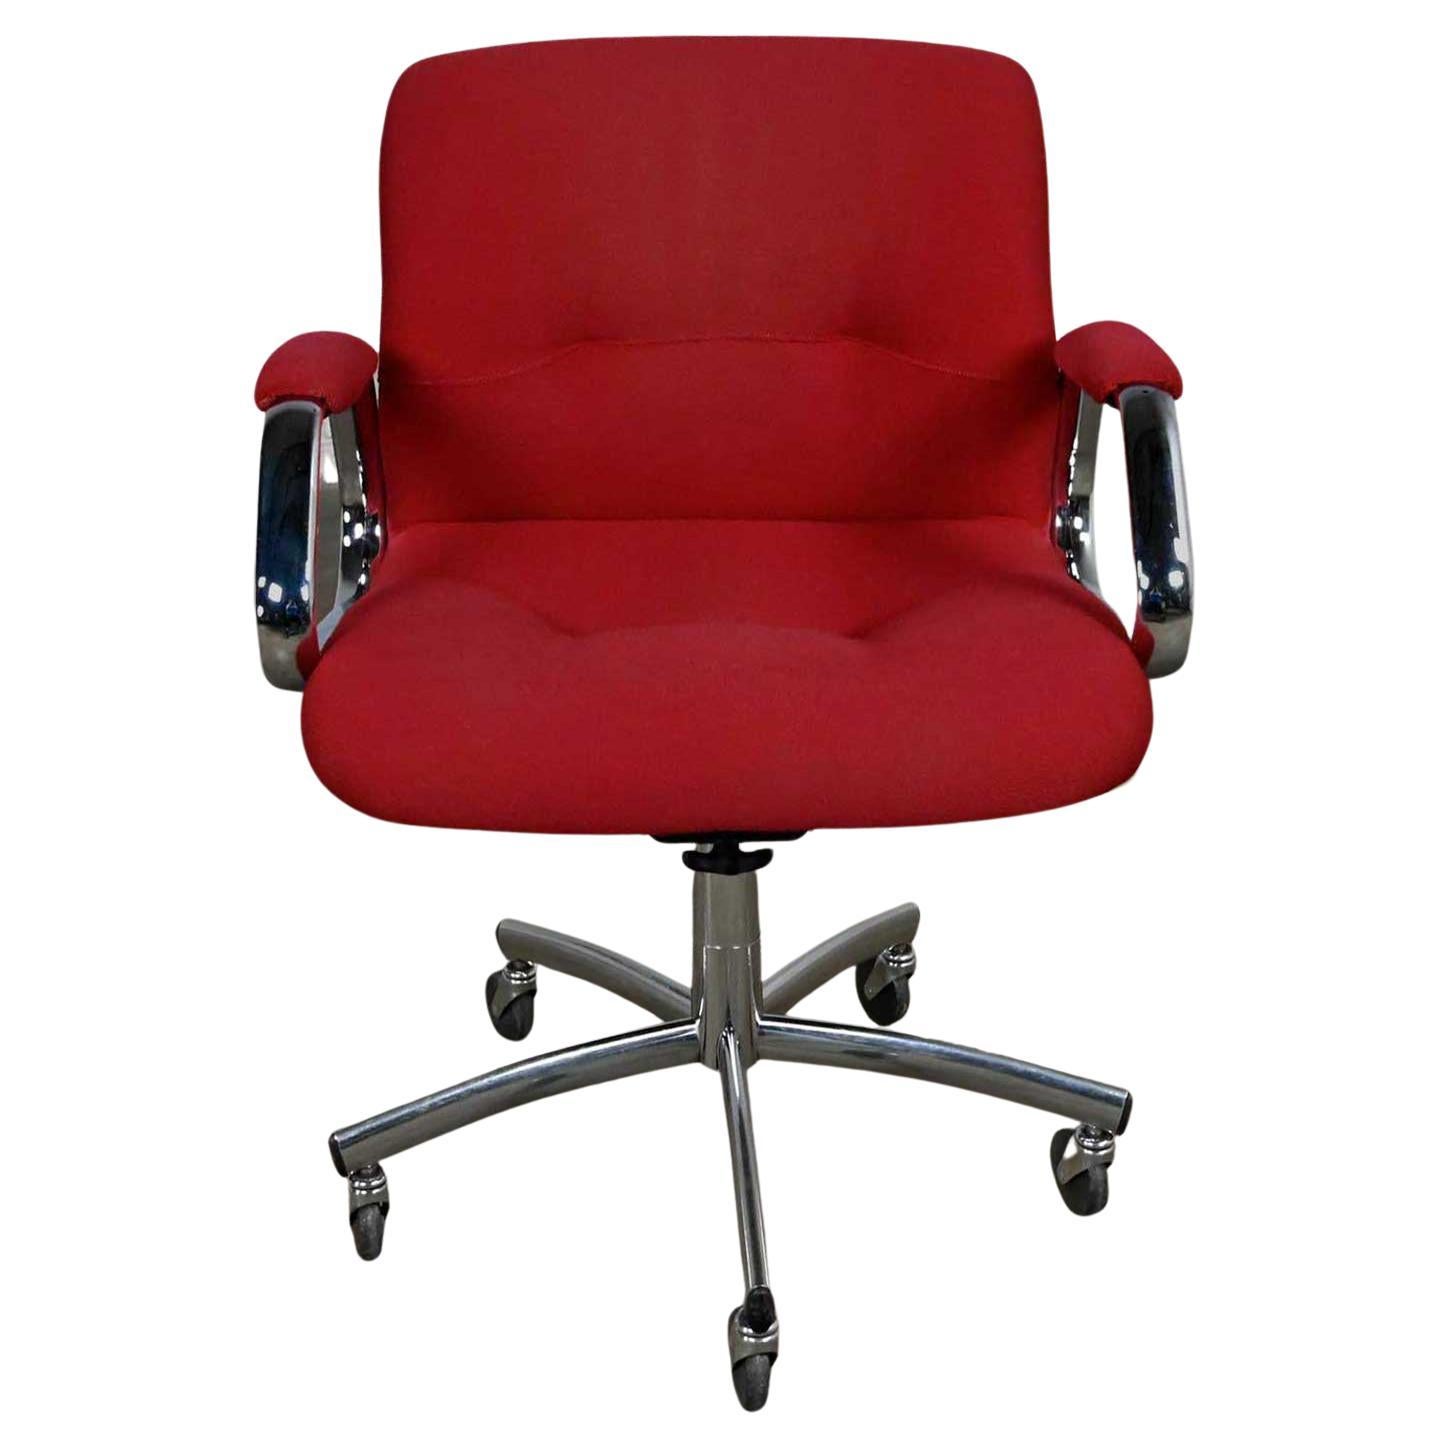 Modern Steelcase Chrome & Red Swivel Rolling Chair #454 Style Charles Pollock